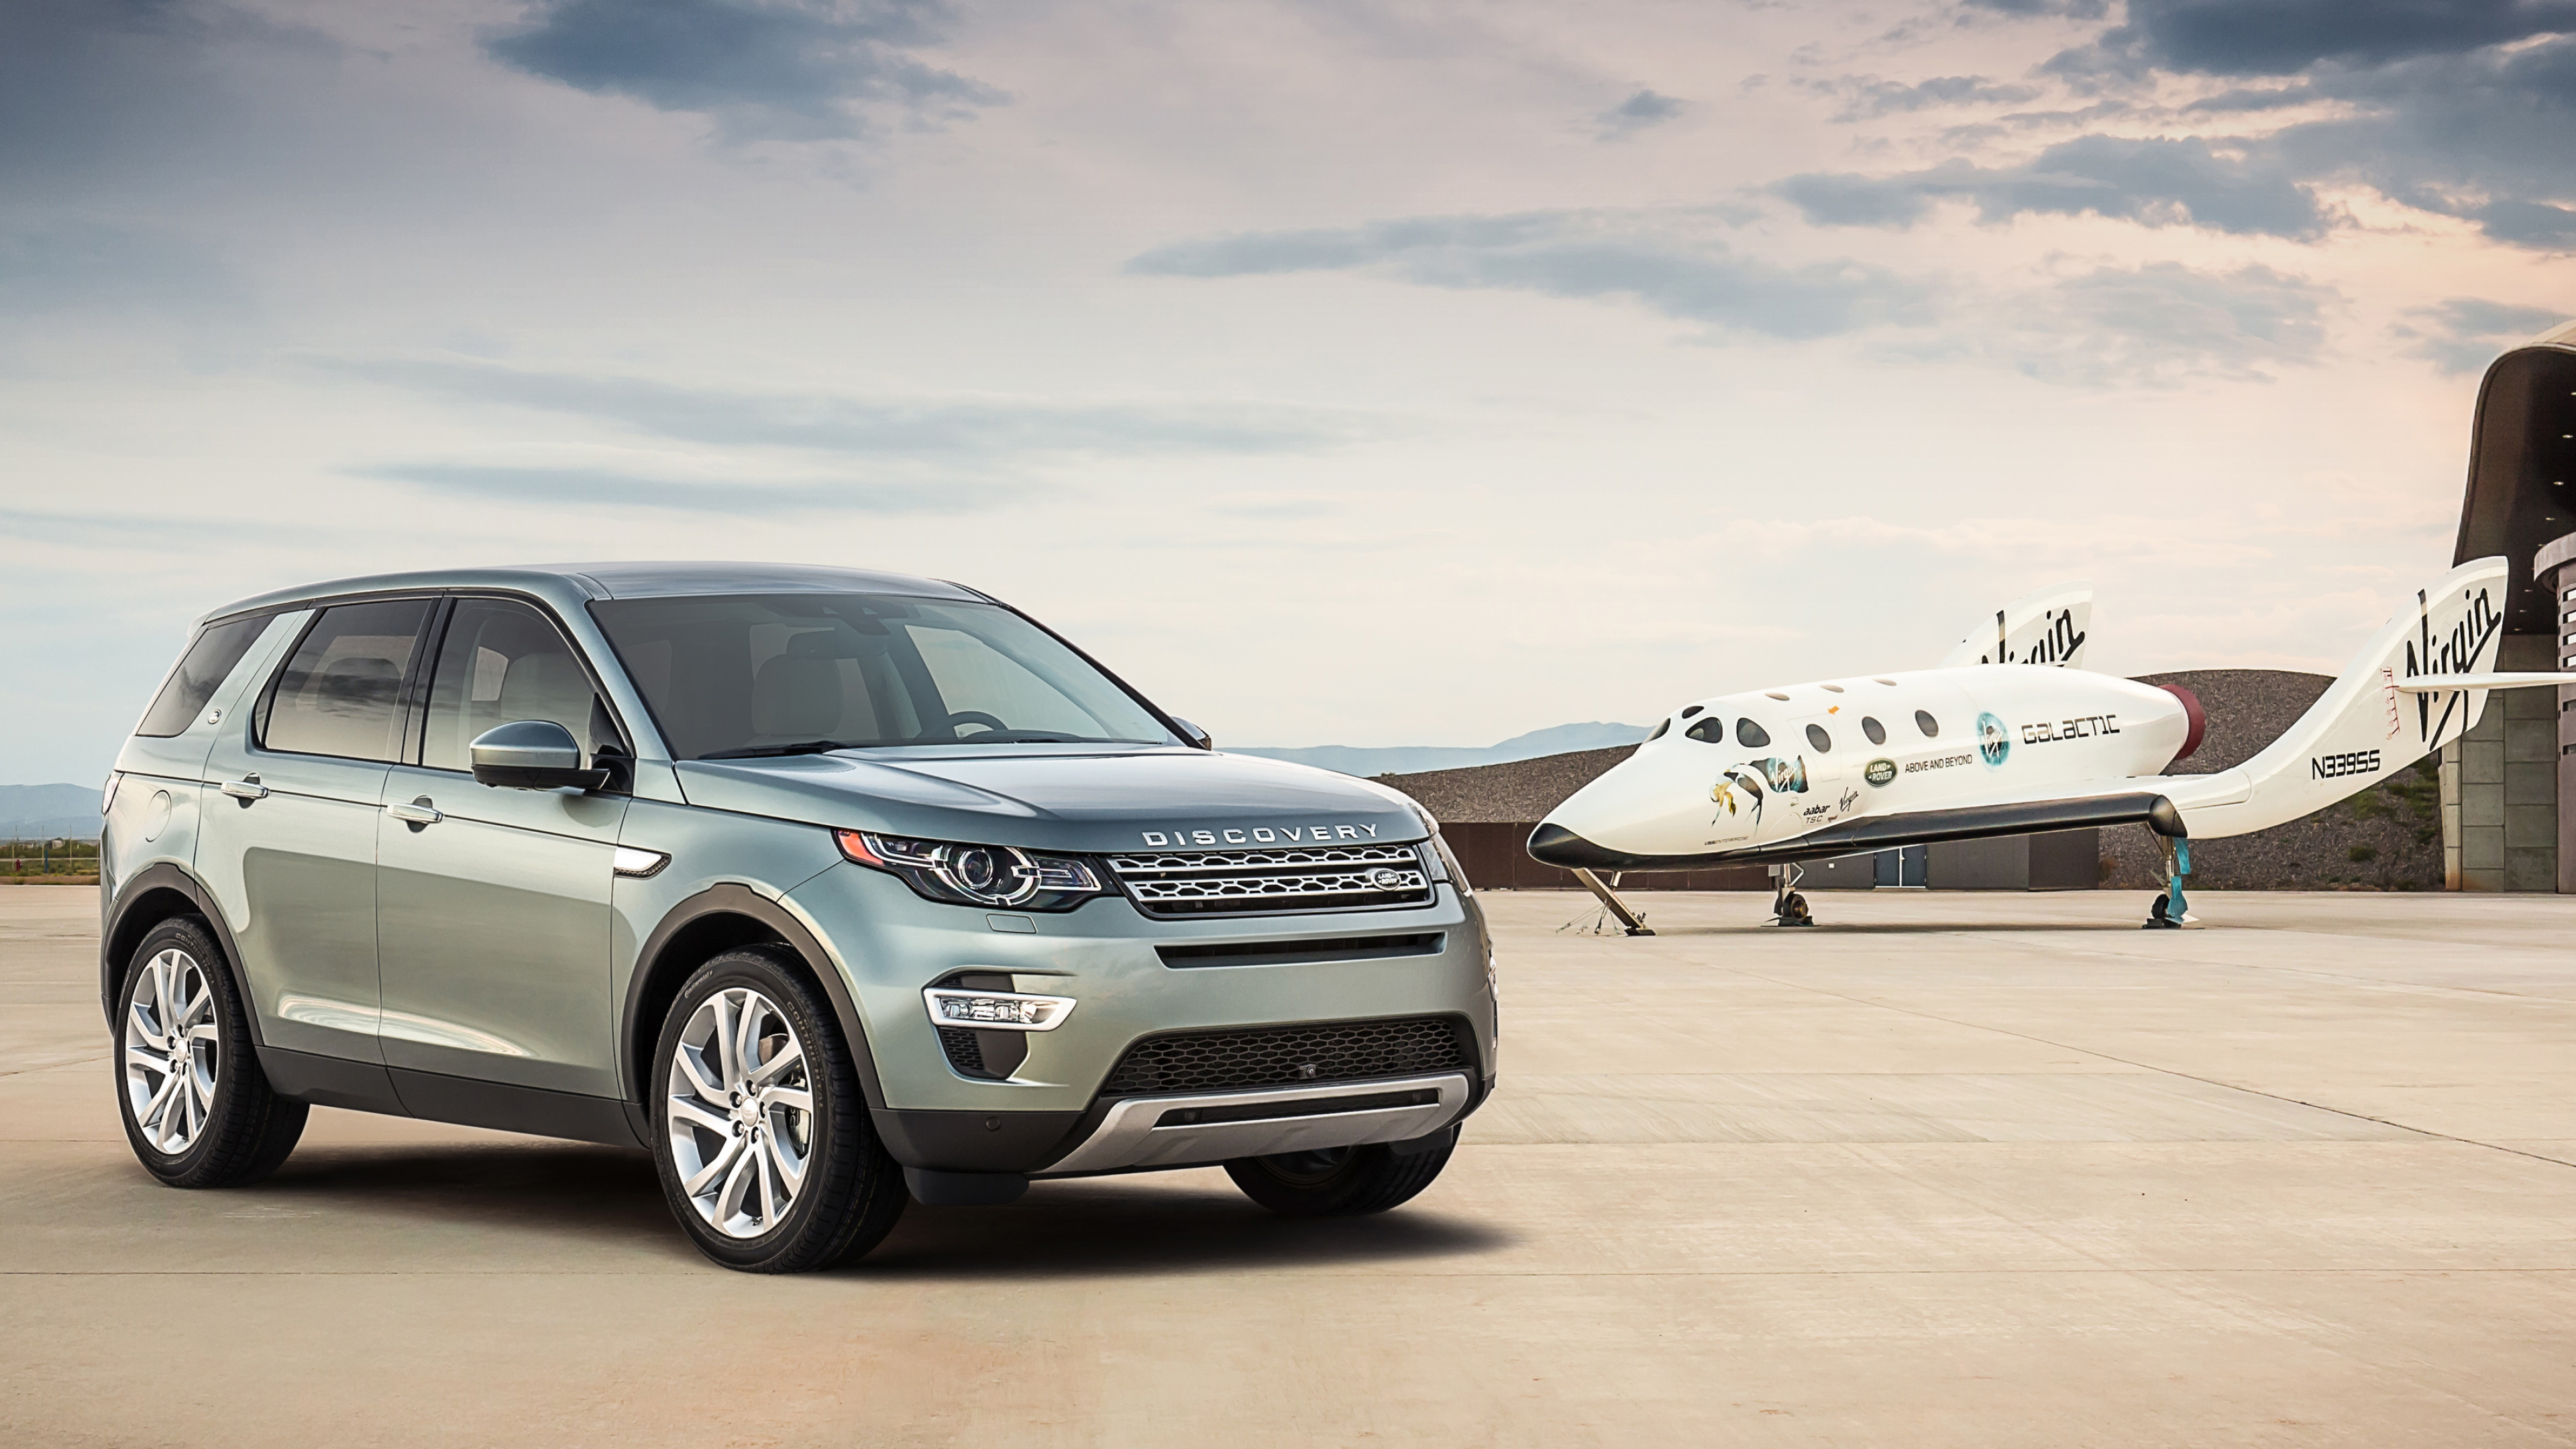 Land Rover Discovery, Discovery Sport, Cars desktop wallpapers, 3840x2160 4K Desktop